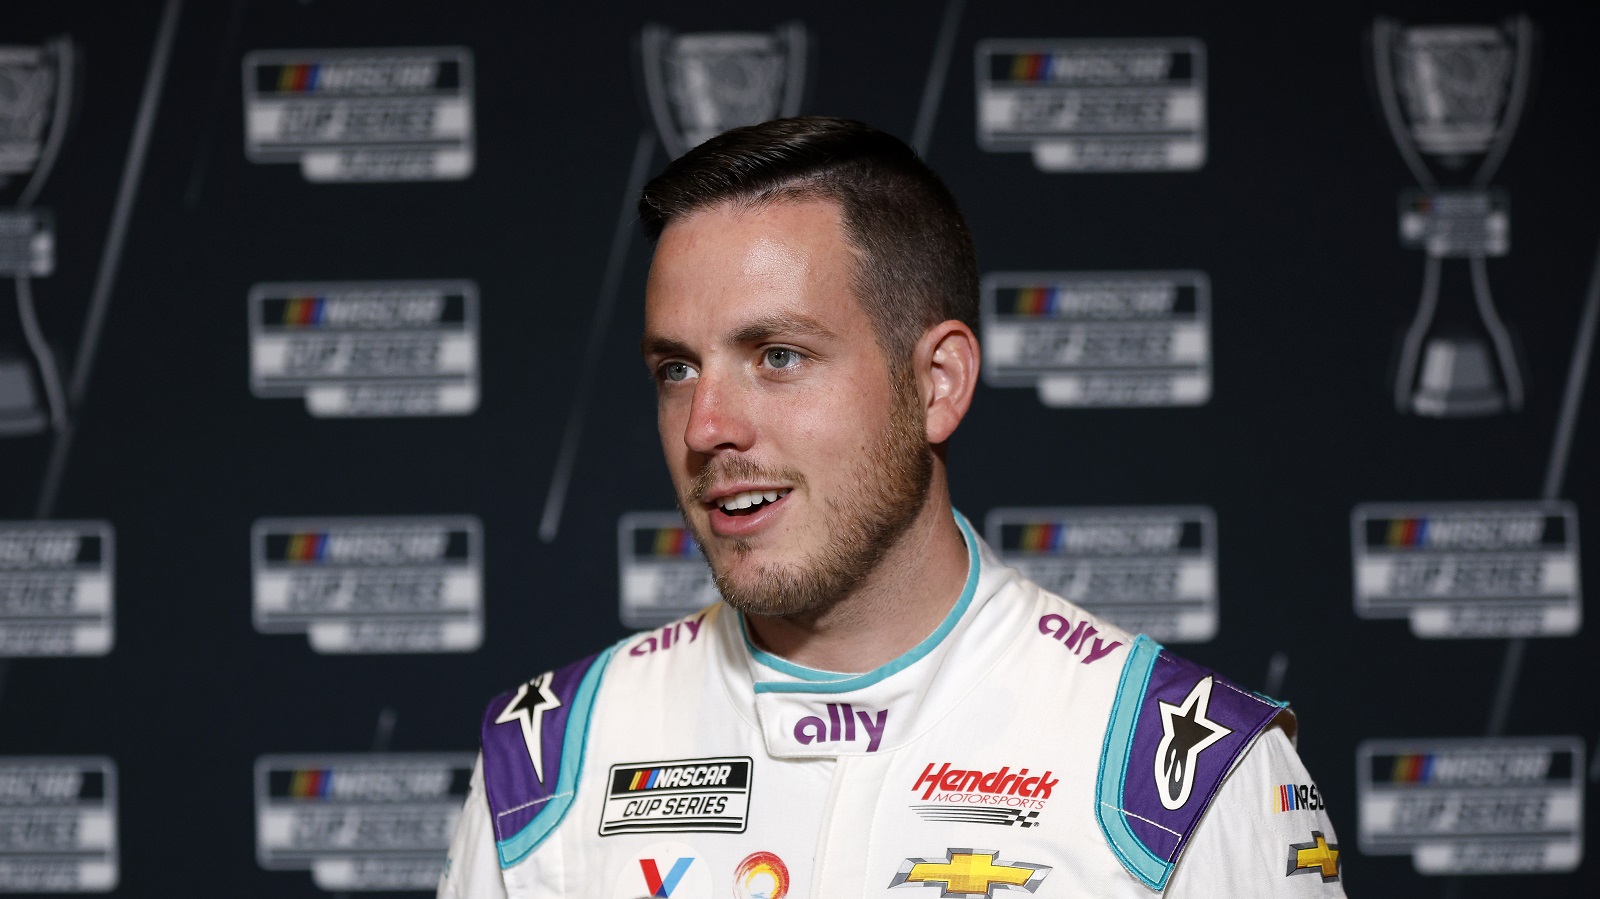 NASCAR driver Alex Bowman speaks with reporters during the NASCAR Cup Series Playoff Media Day at Charlotte Convention Center on Sept. 1, 2022 in Charlotte, North Carolina. | Jared C. Tilton/Getty Images